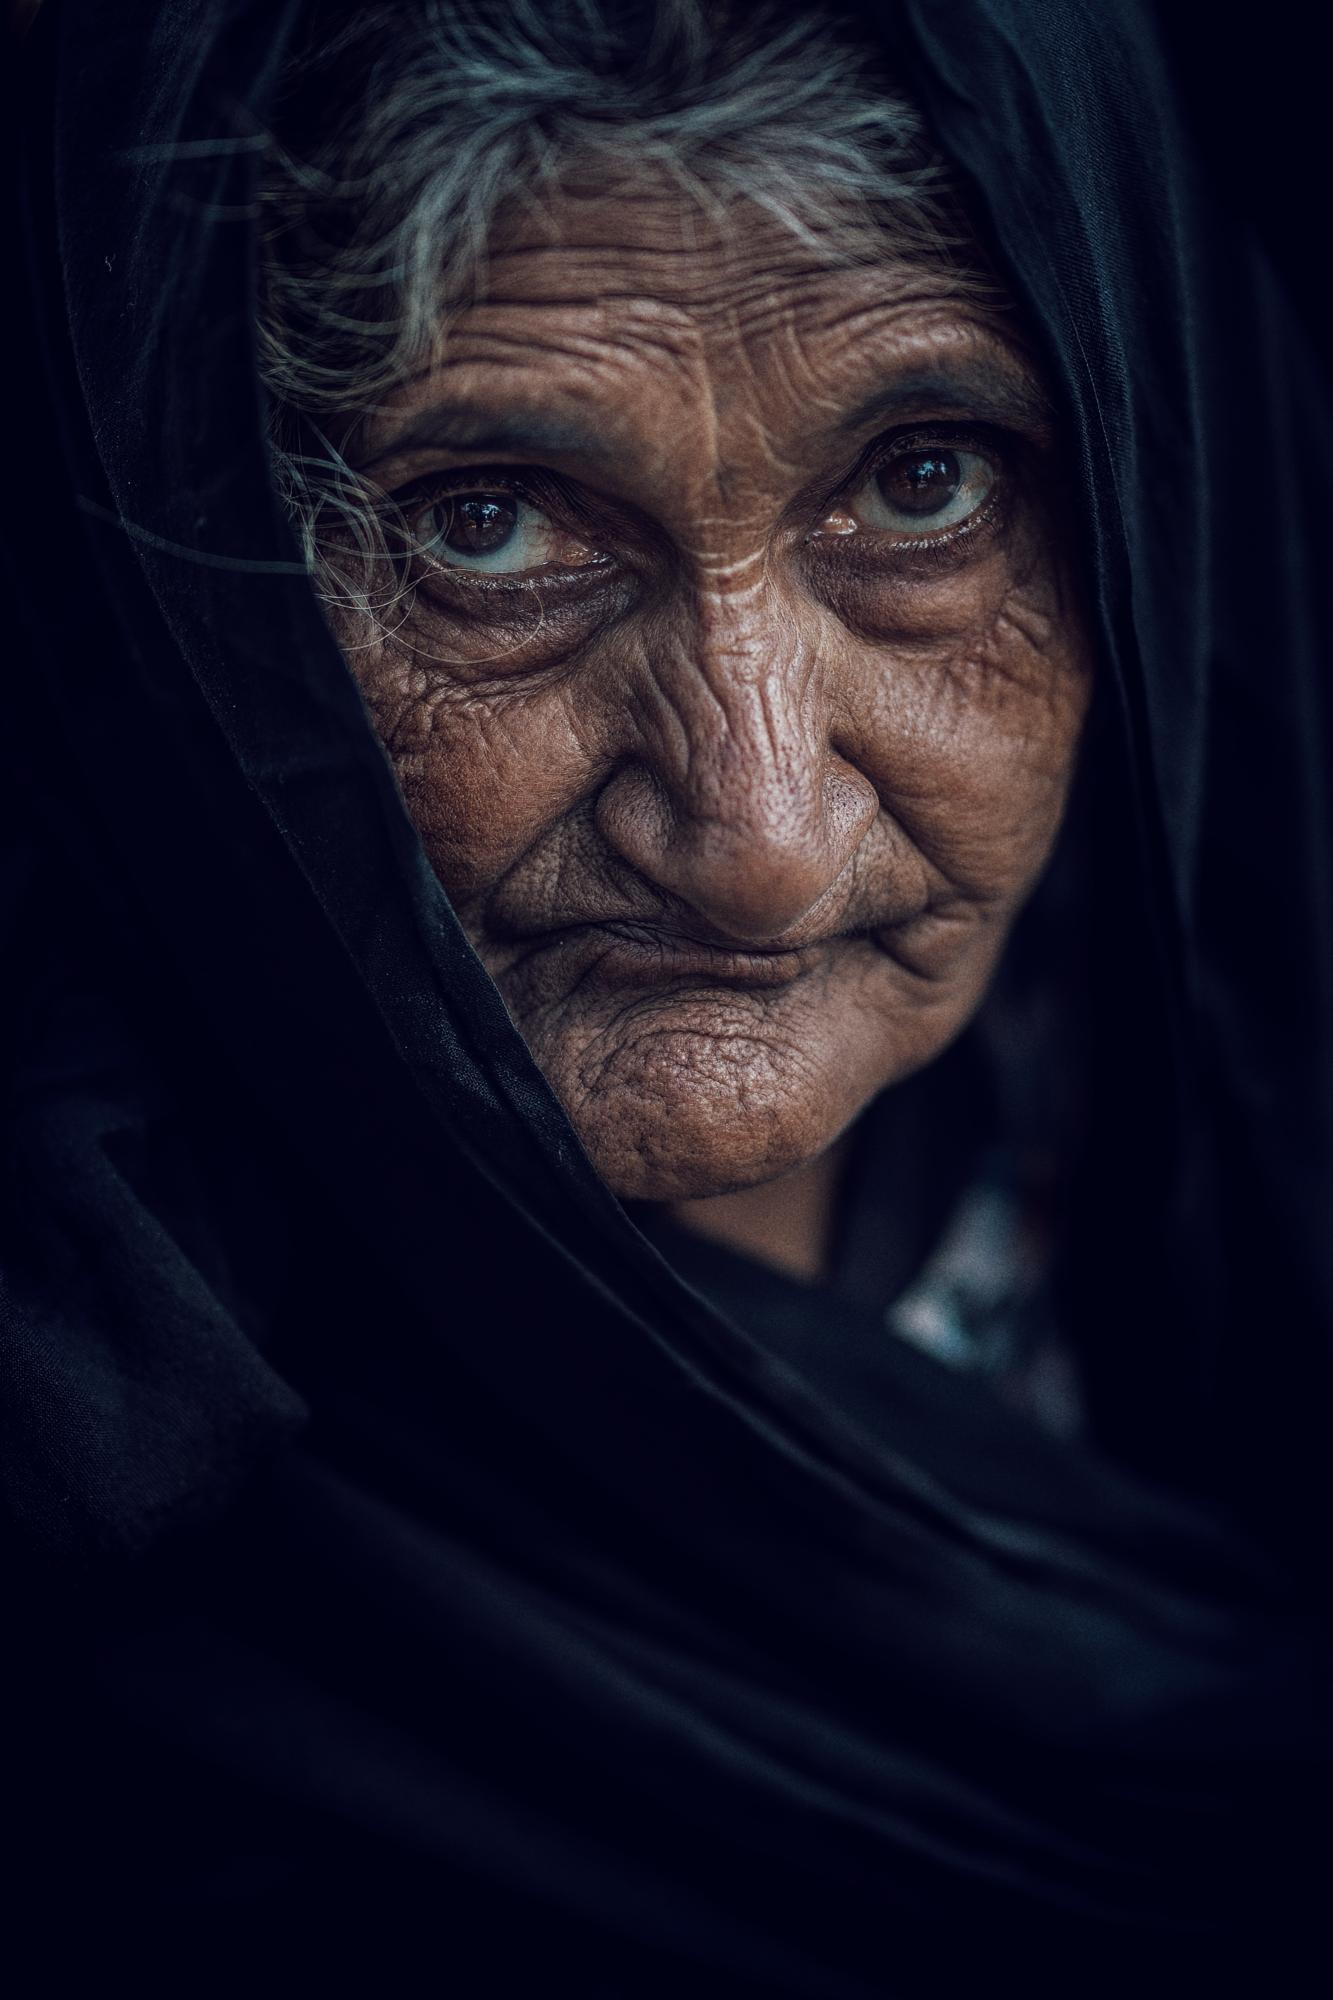 Two centuries of living with the people of Afghanistan - What always impresses me are the attractive faces of the people of my country, Afghanistan And...